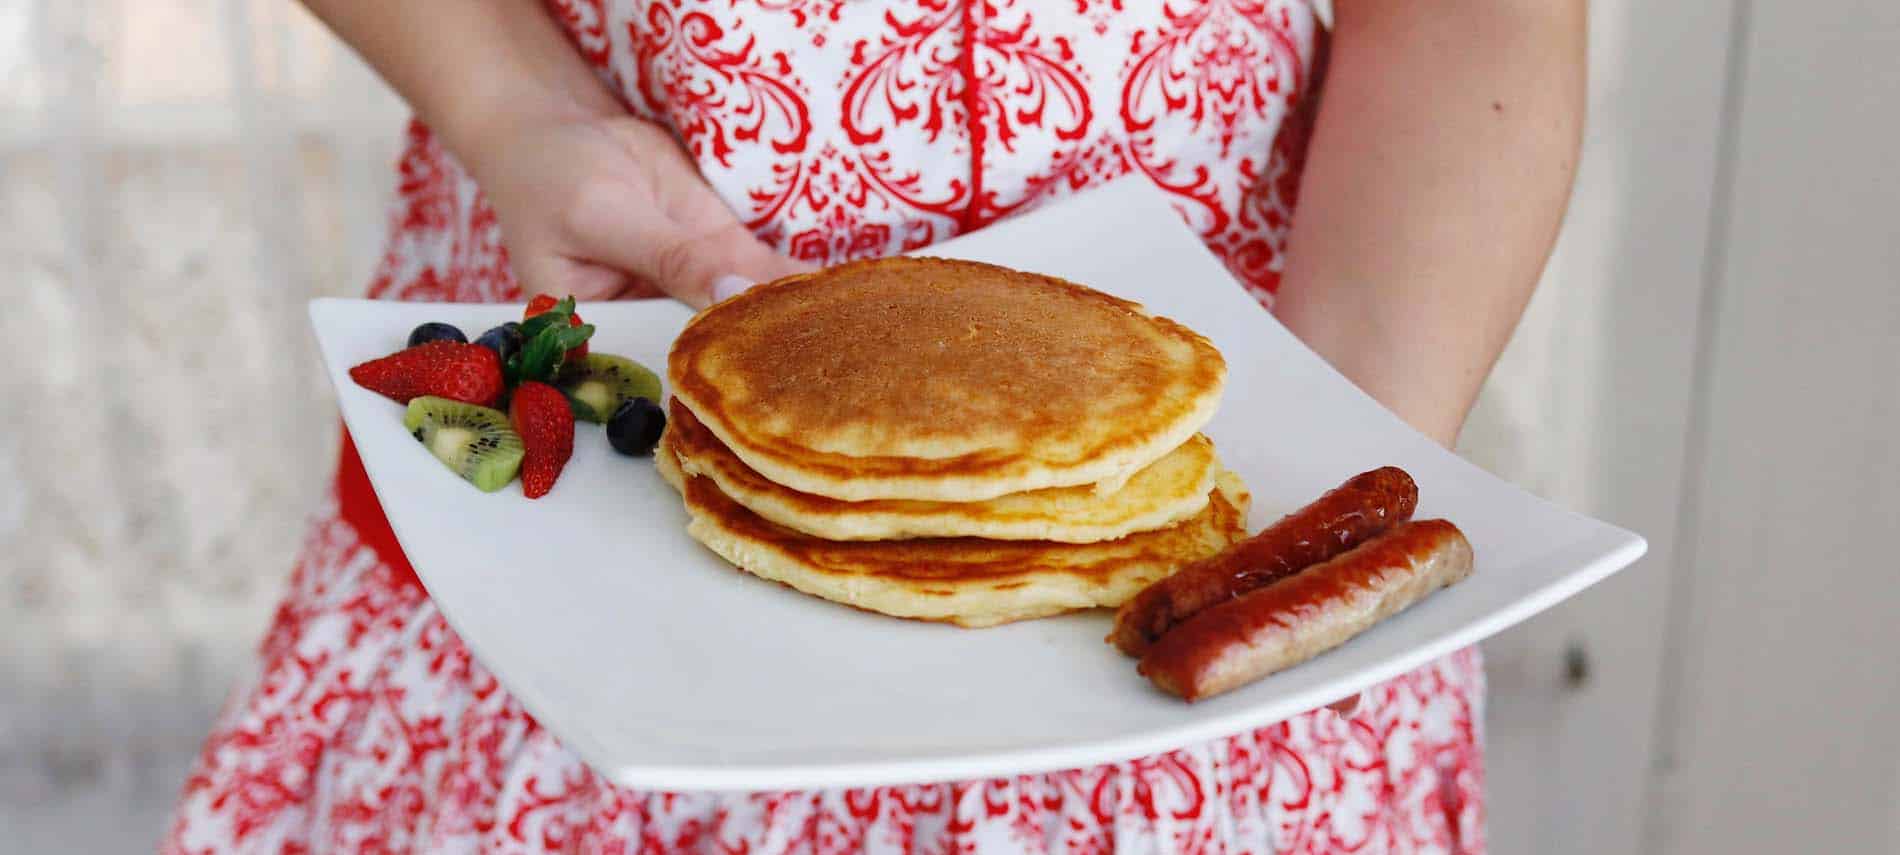 vignette-hands-holding-plate-of-pancake-red-white-apron